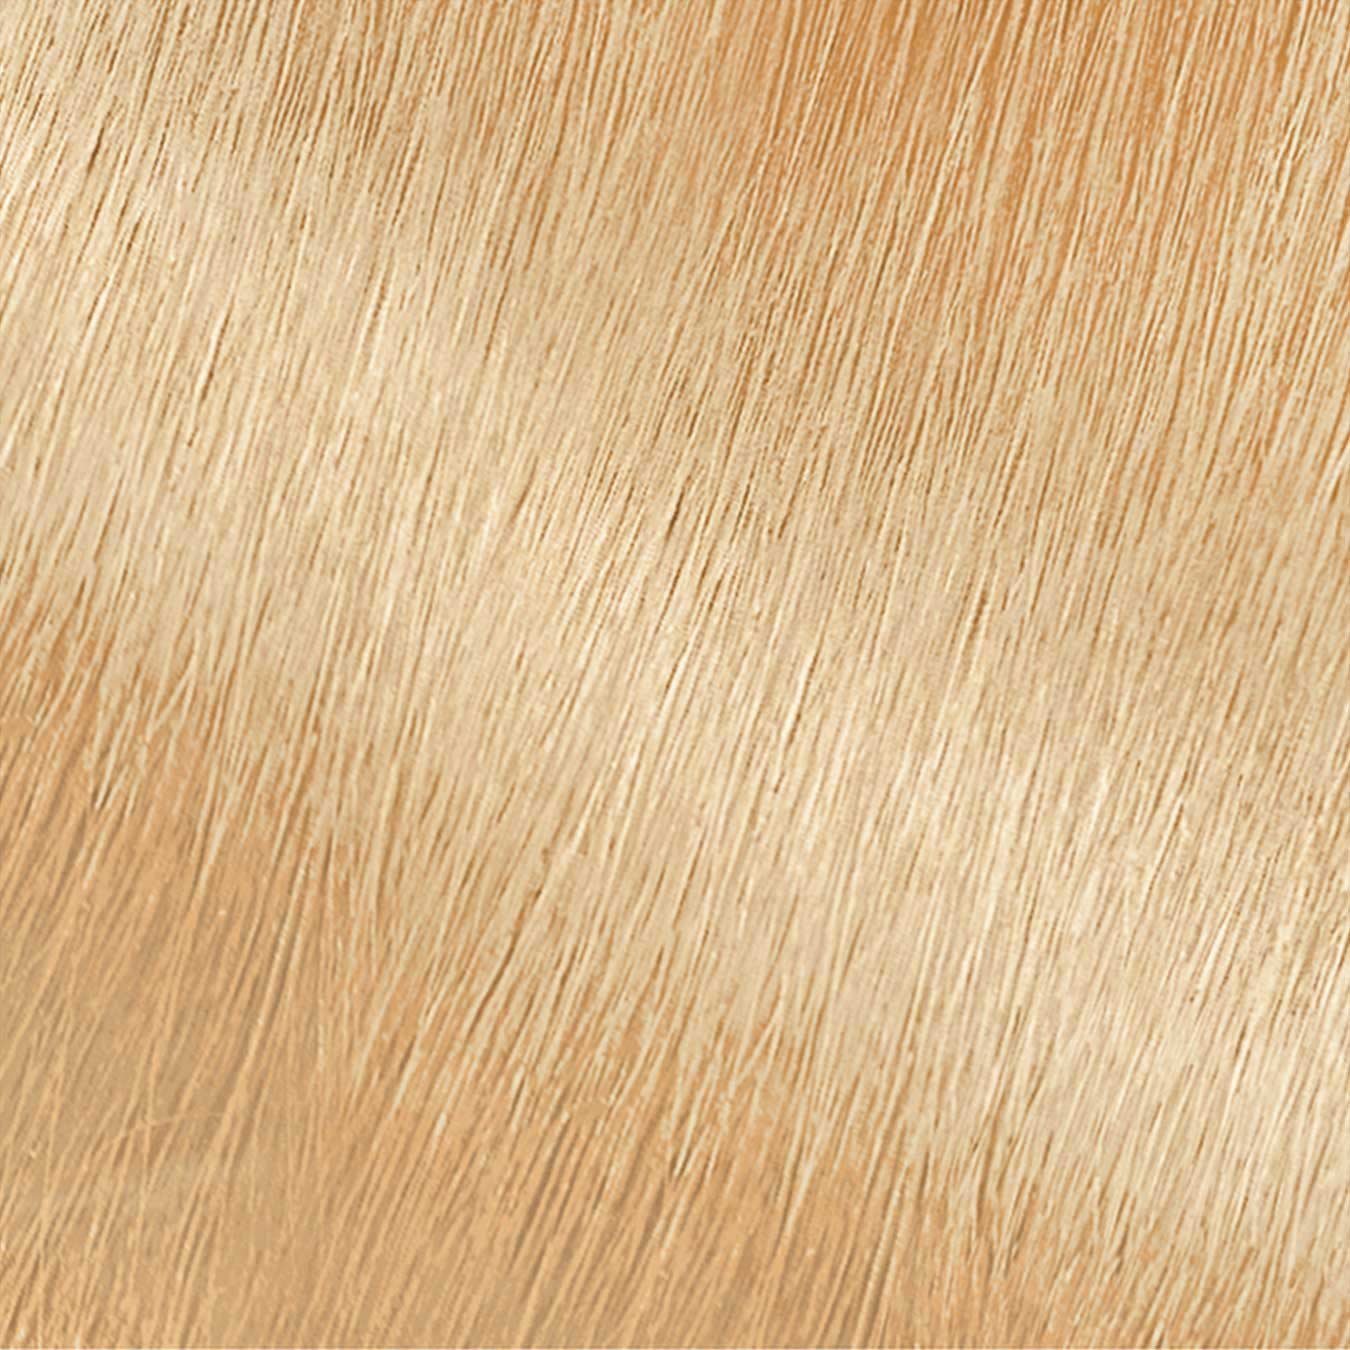 garnier nutrisse nourshing color creme hair color swatch 101 extra light buttery blonde shade